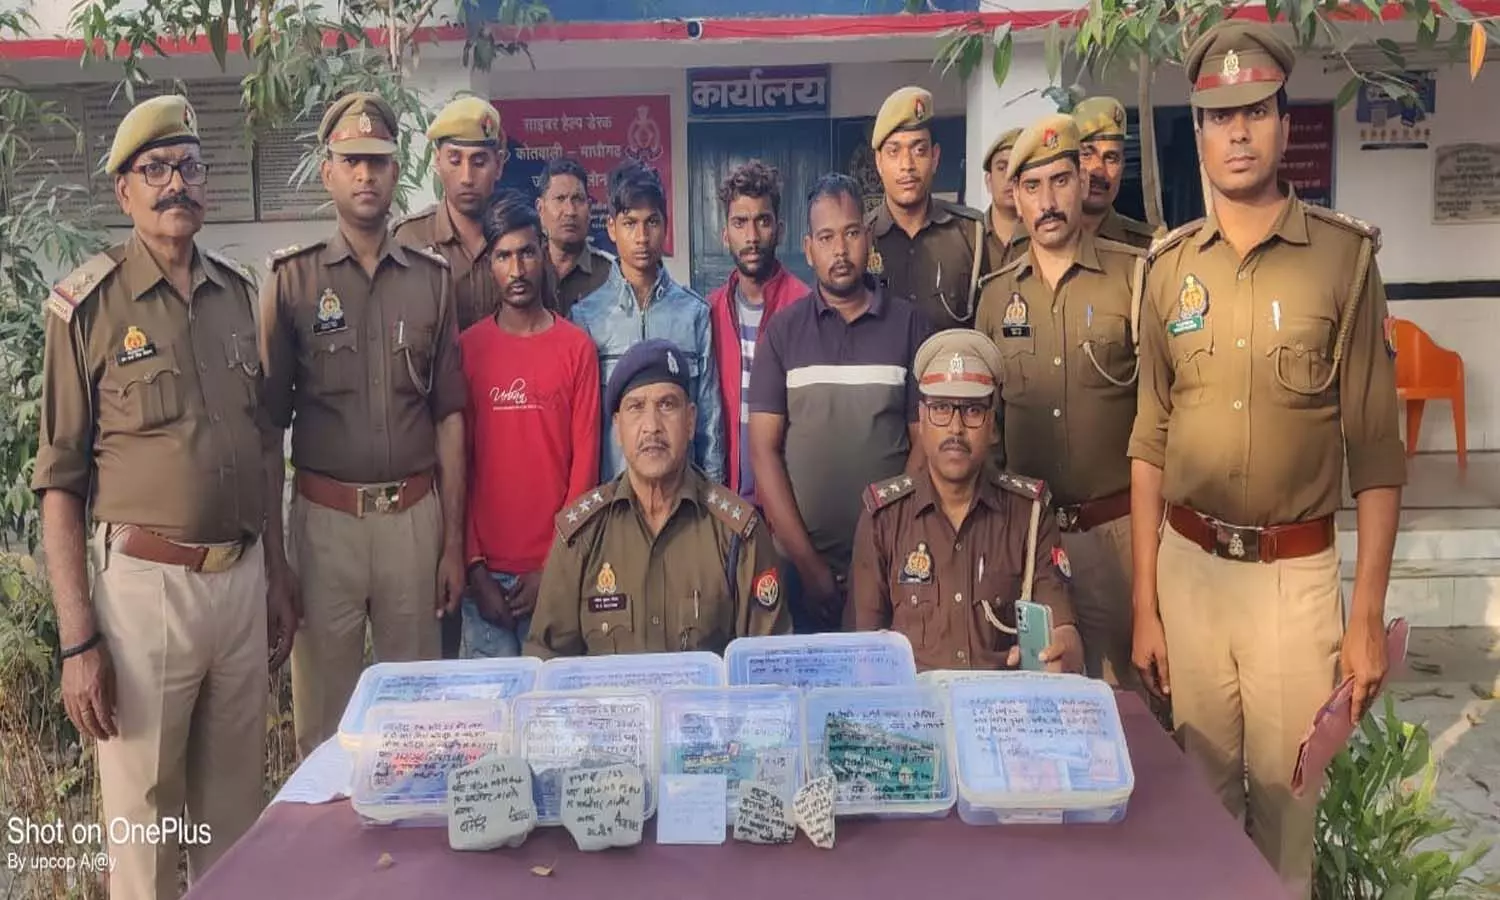 Four interstate vicious miscreants arrested in Jalaun, police recovered charas along with illegal weapons